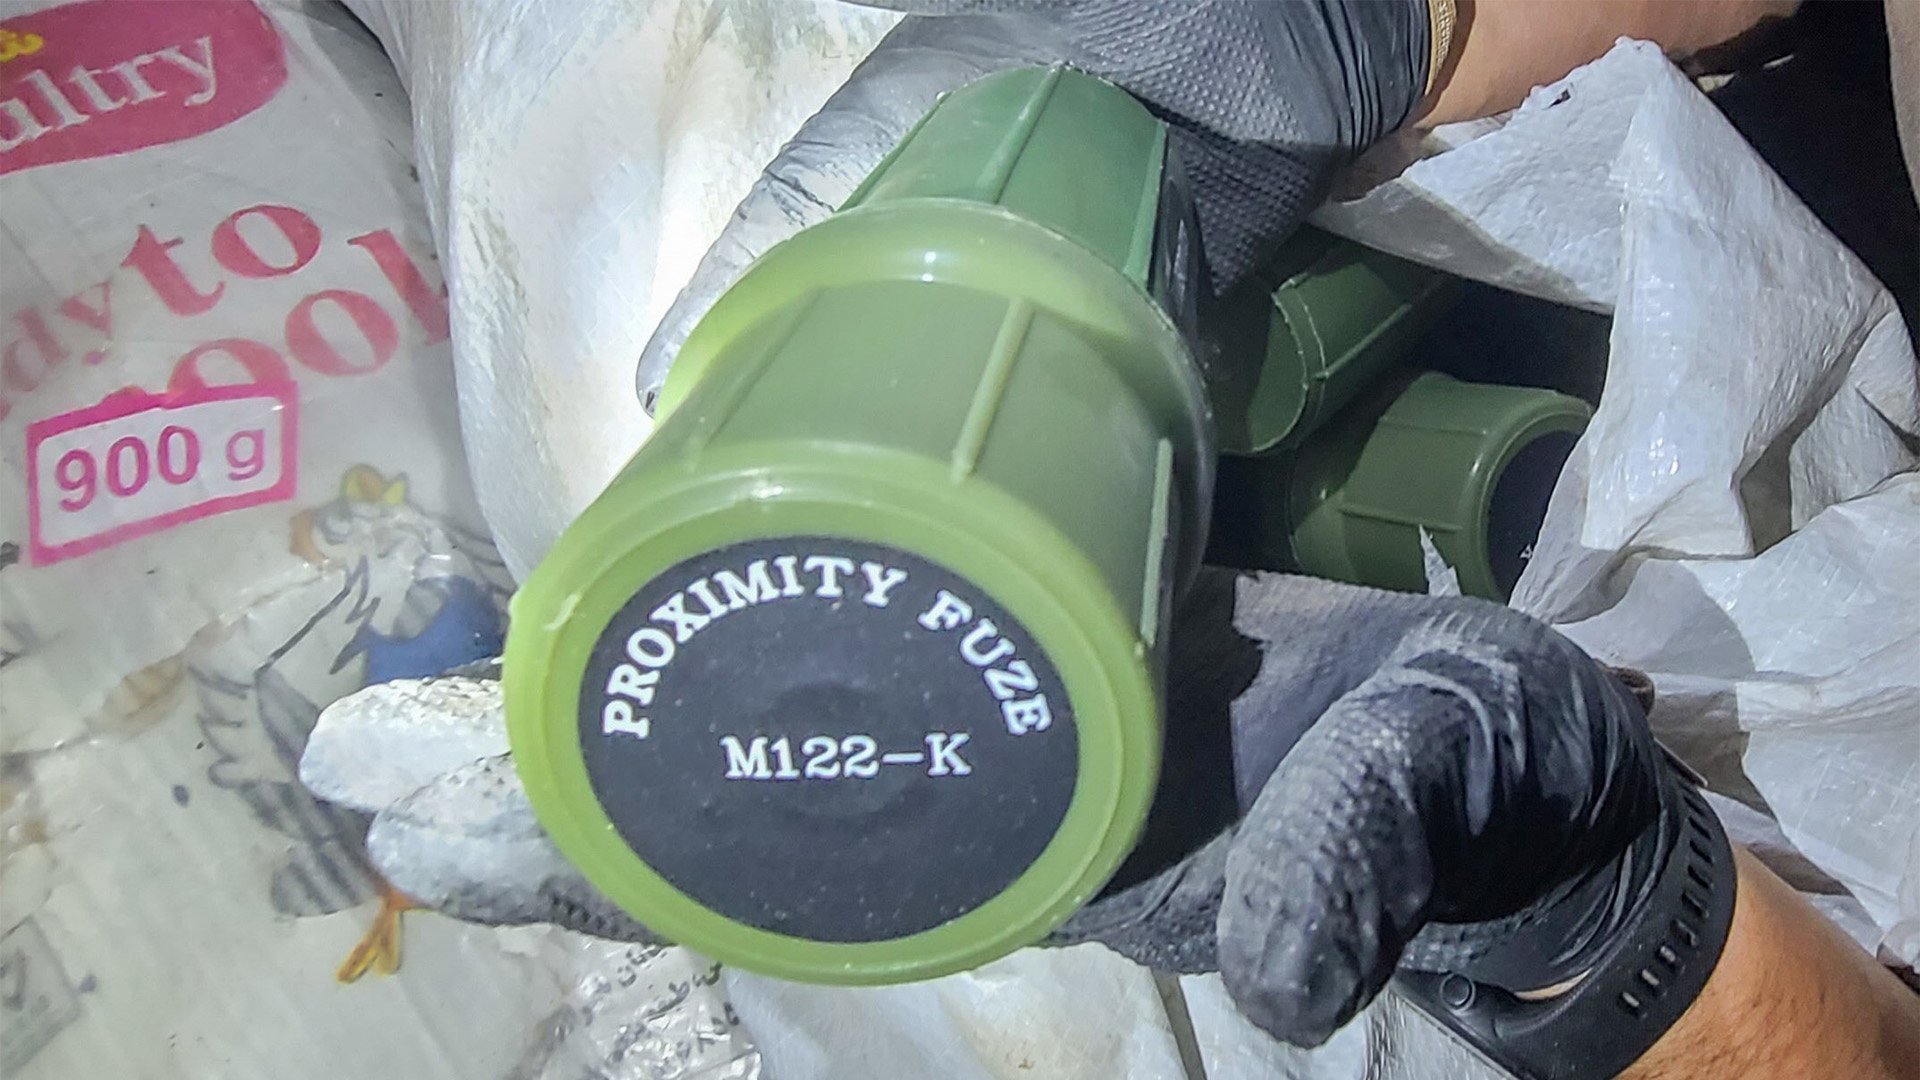 This is a proximity fuse US Central Command said was seized from a fishing trawler interdicted by the expeditionary sea base Lewis B. Puller on Dec. 1, 2022, in the Gulf of Oman. US Navy photo.